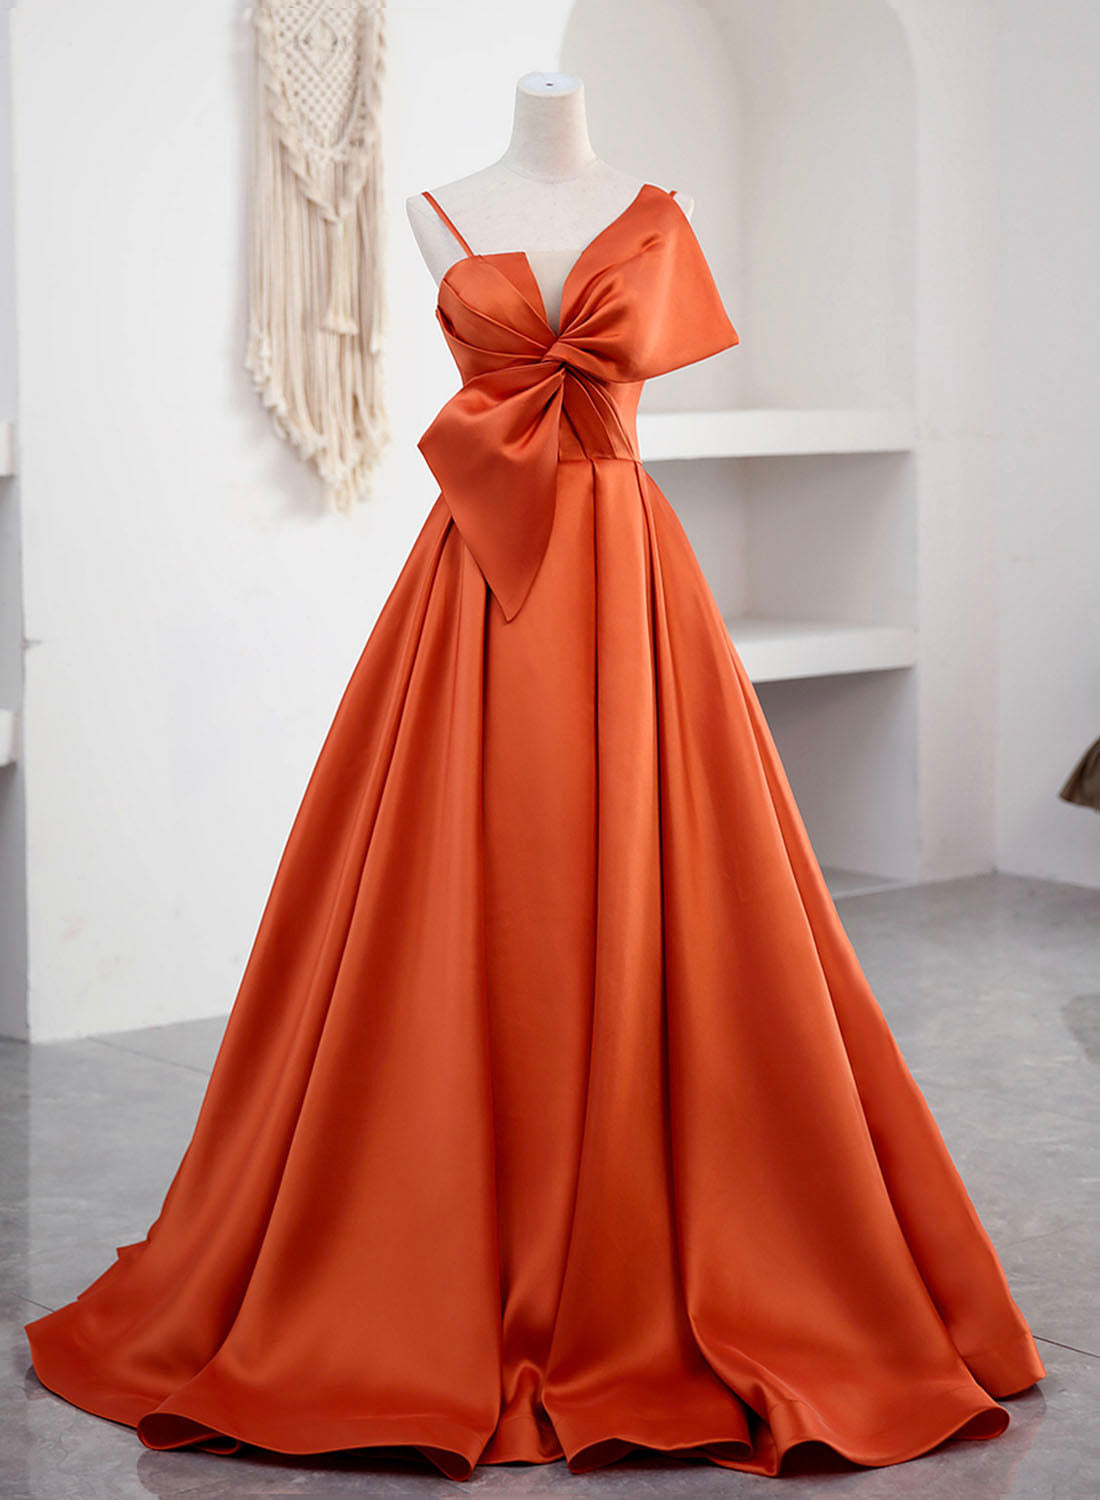 Spaghetti Straps Orange Satin Corset Prom Corset Formal Dress, A-Line Floor Length Evening Dress outfit, Party Dress Aesthetic